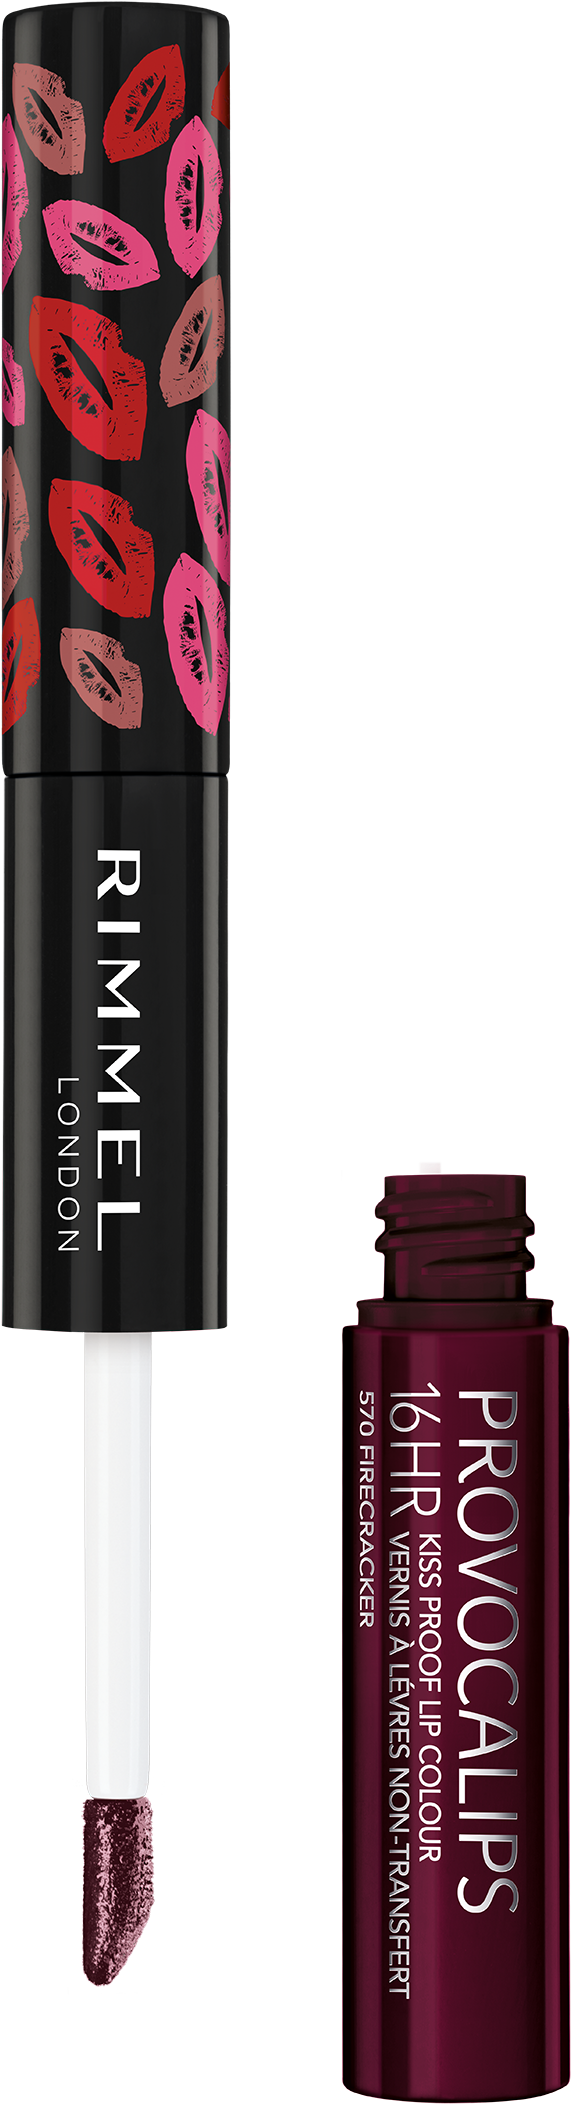 Rimmel London Provocalips 16hr Kiss Proof Lip Color, - Rimmel London Provocalips 16hr Kiss Proof Lip Colour (701x2214), Png Download